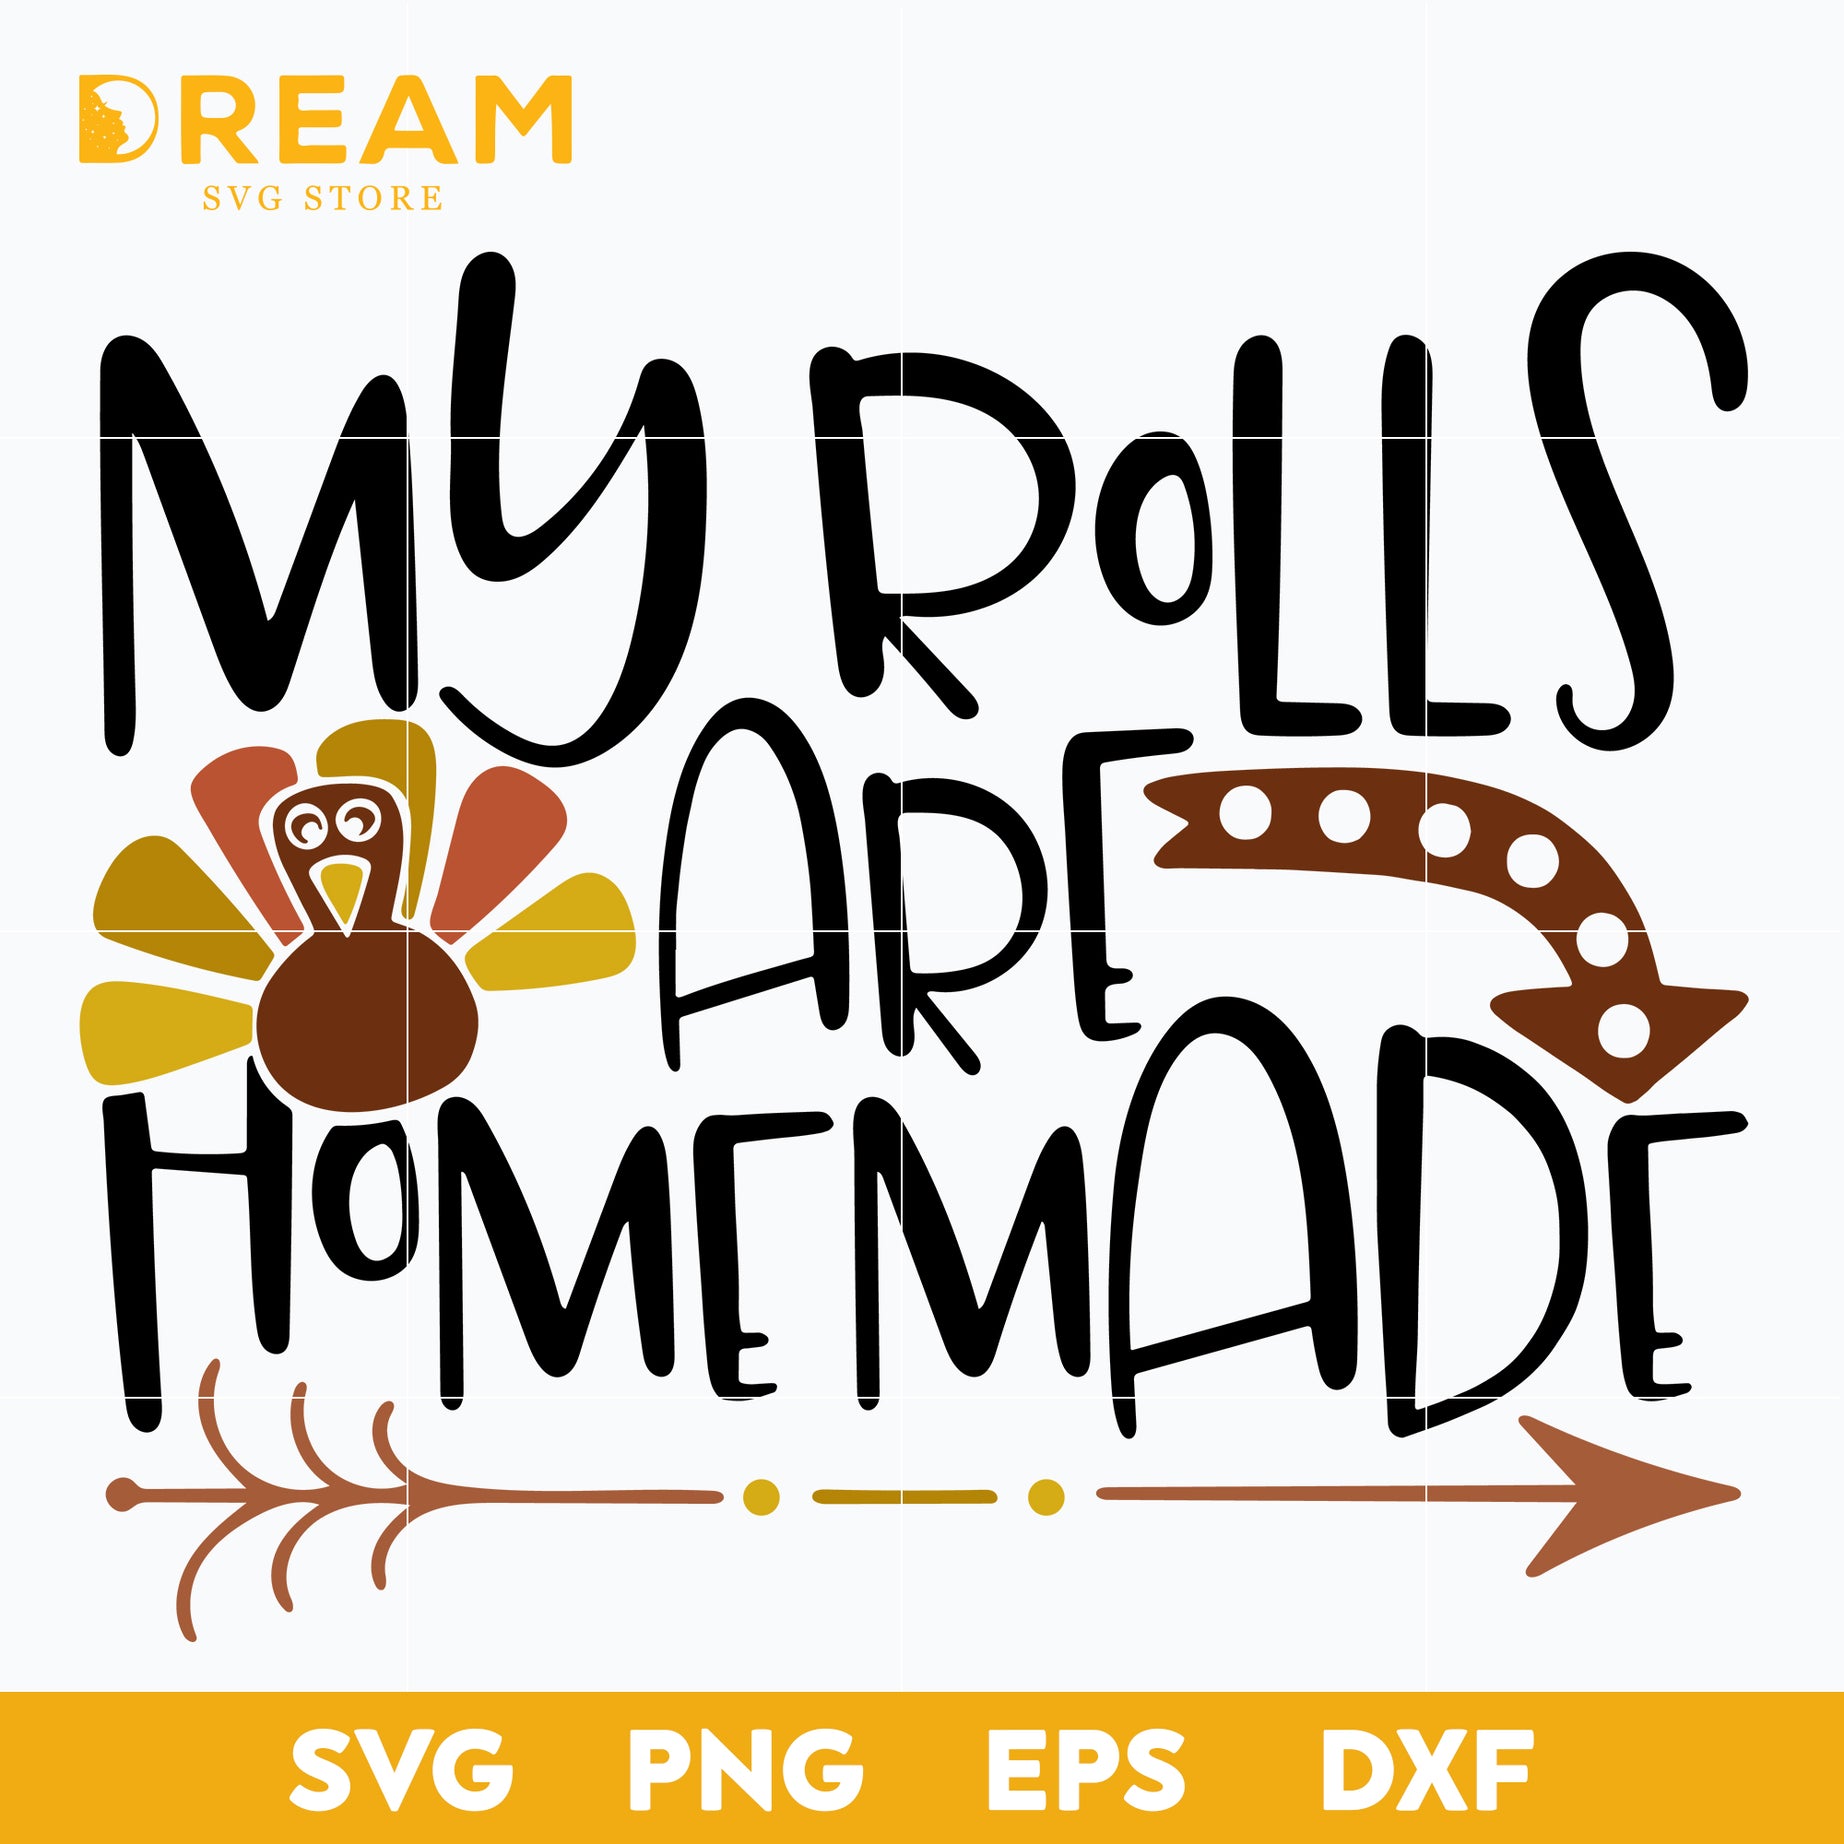 My rolls are homemade svg, Thanksgiving day svg, png, dxf, eps digital file TGV0711203L